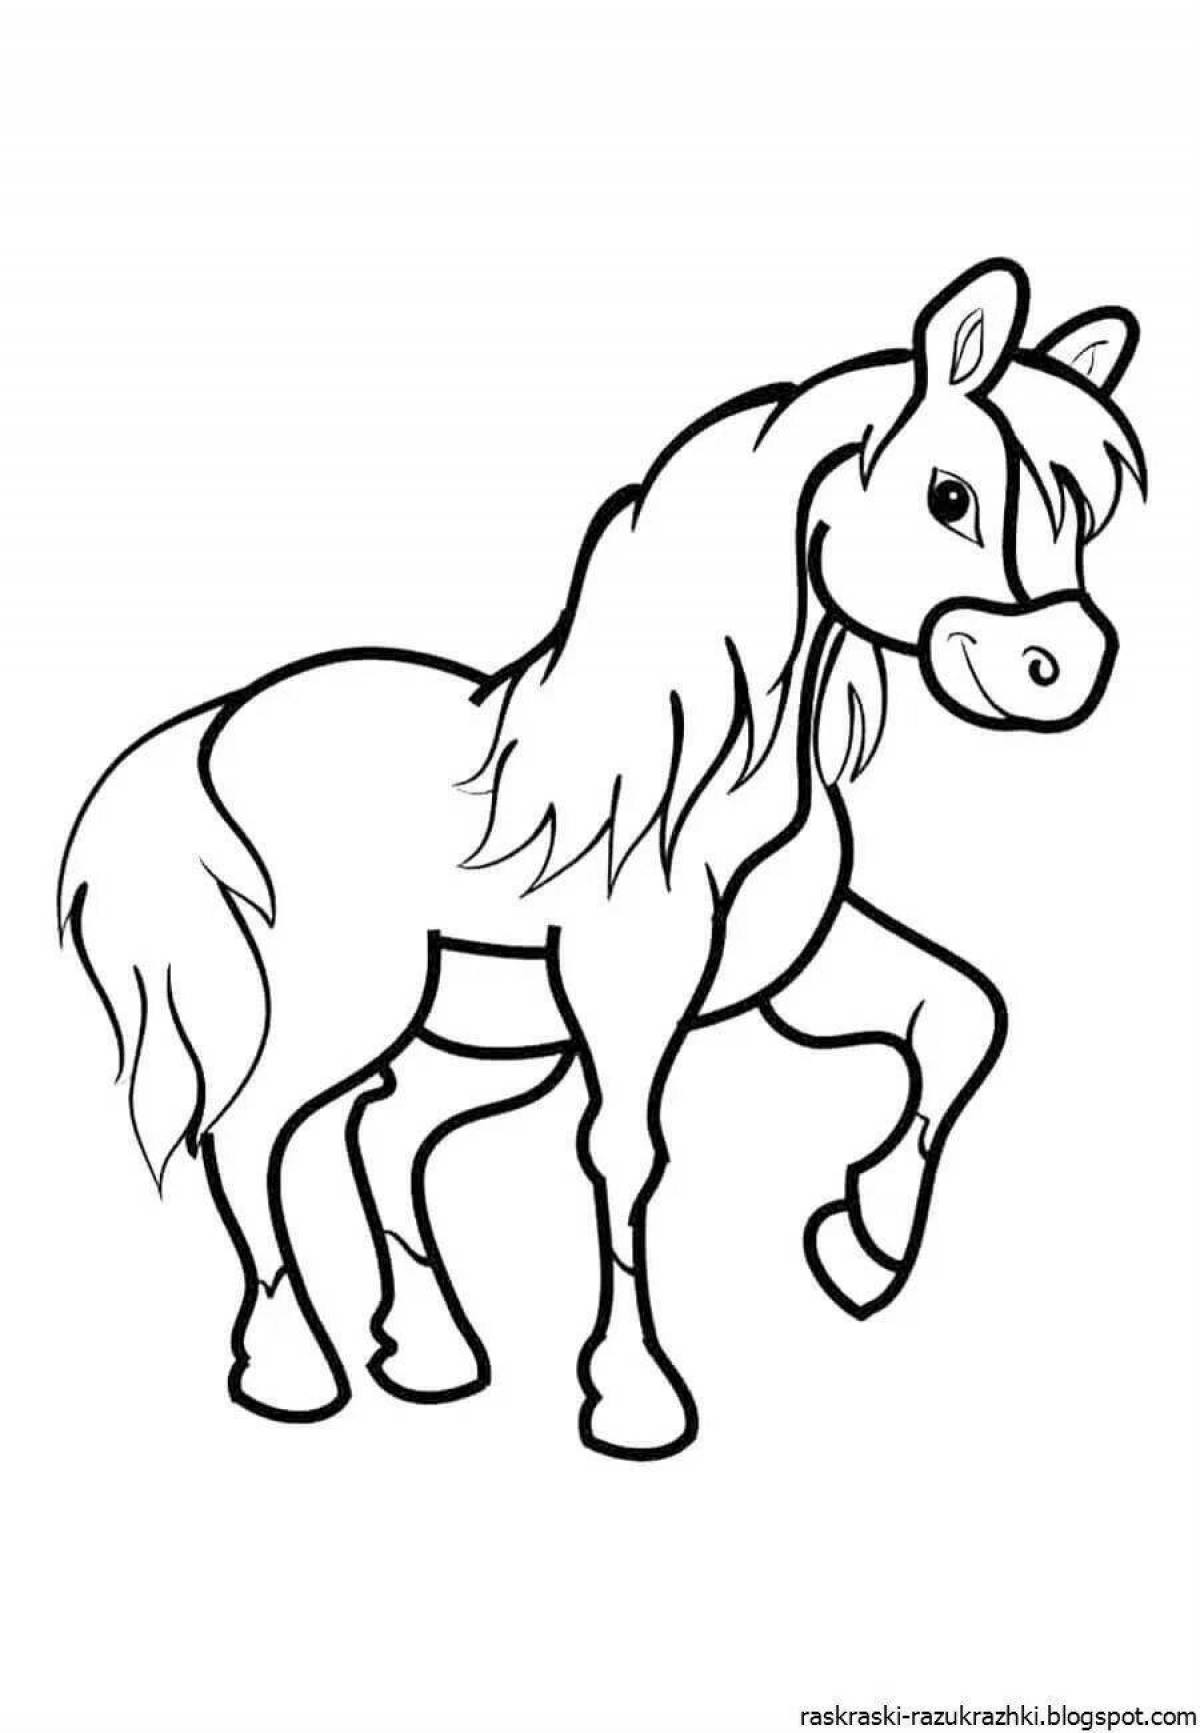 Fantastic drawing of a horse for children